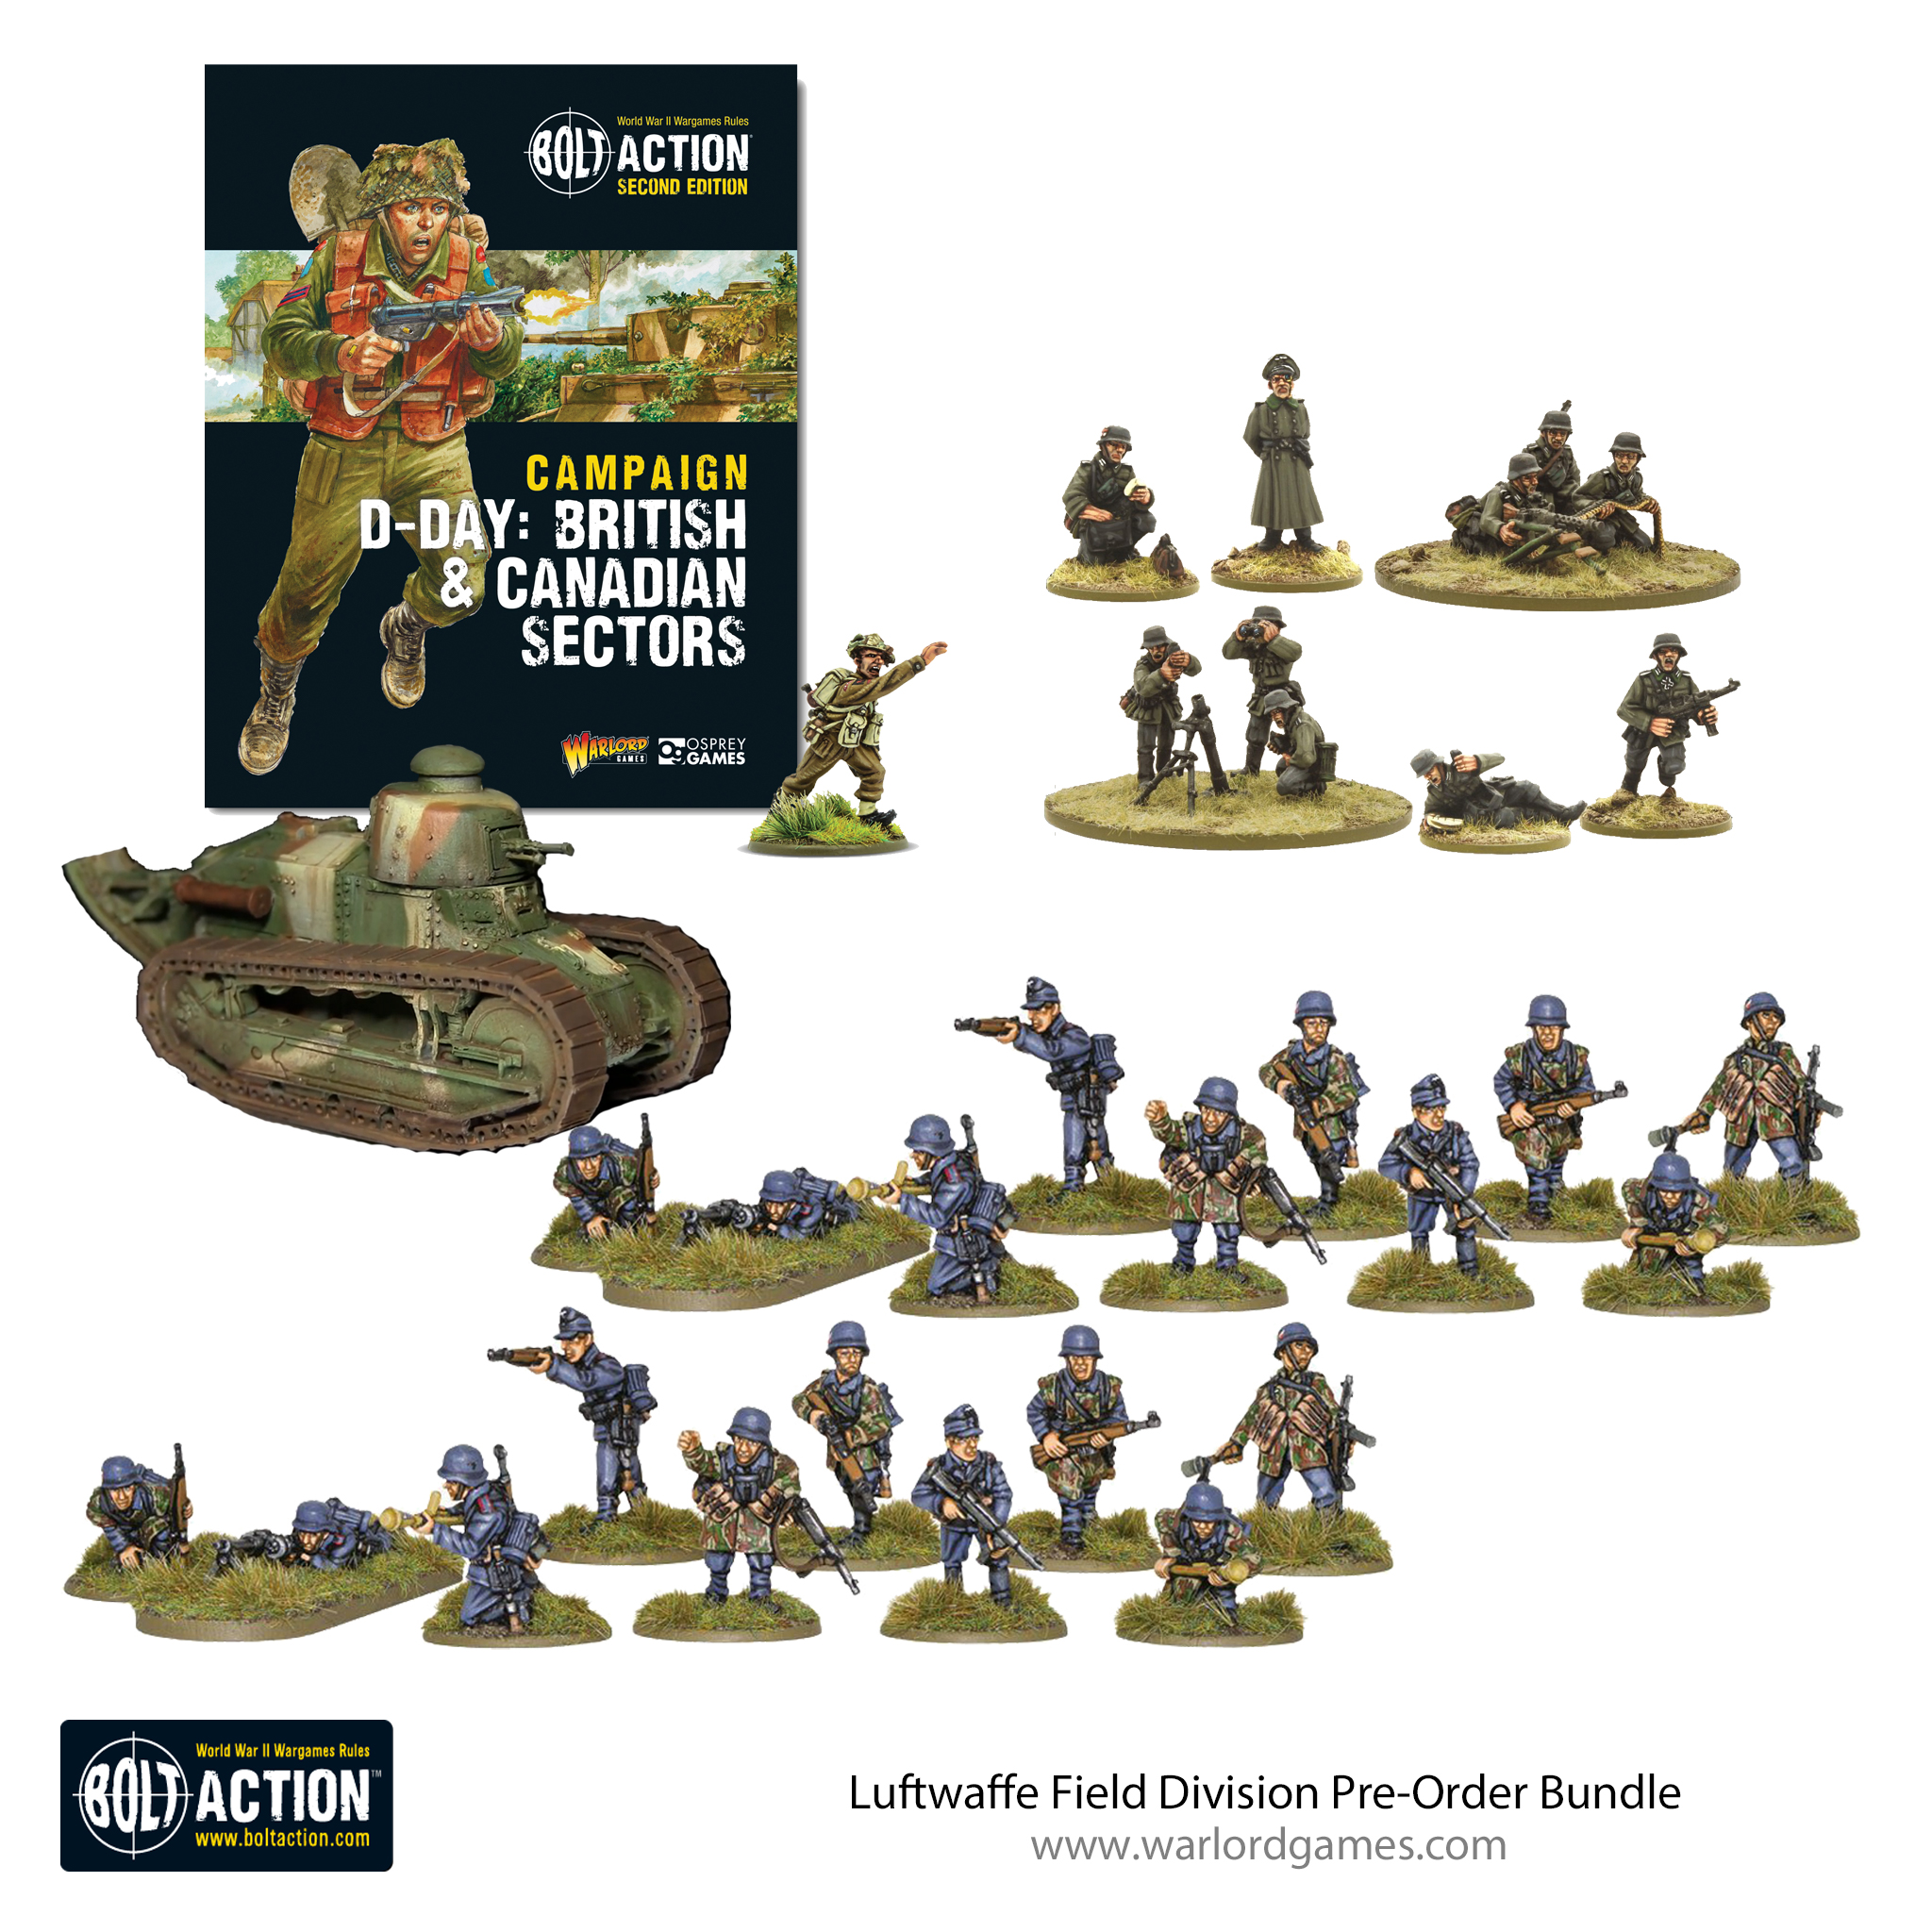 Warlord Games Bolt Action German Luftwaffe Field Division Squad